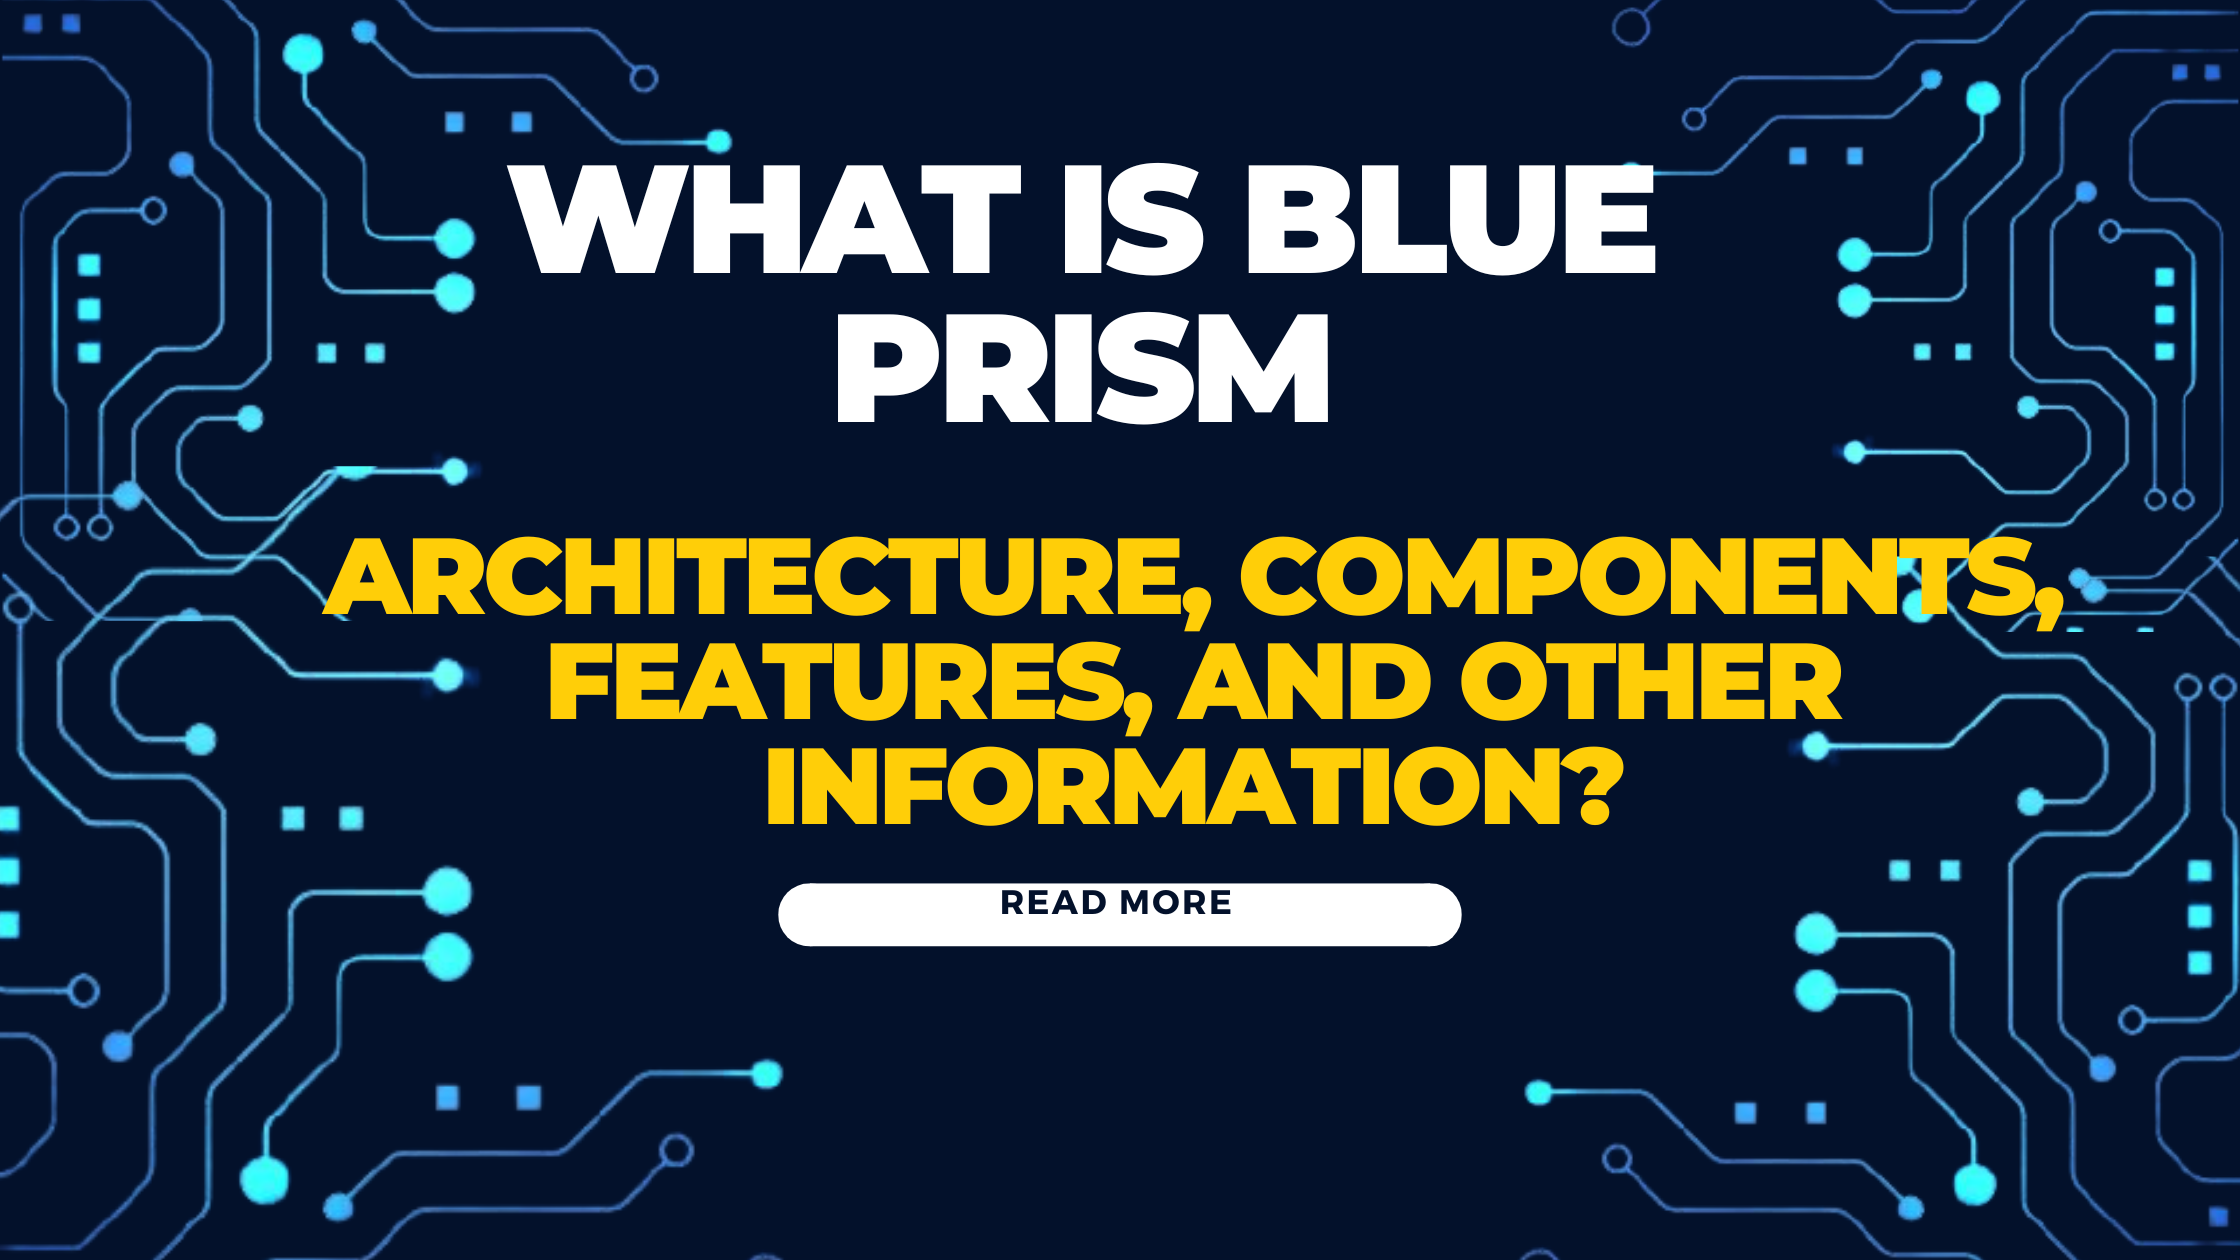 What Is Blue Prism: Architecture, Components, Features, and Other Information?